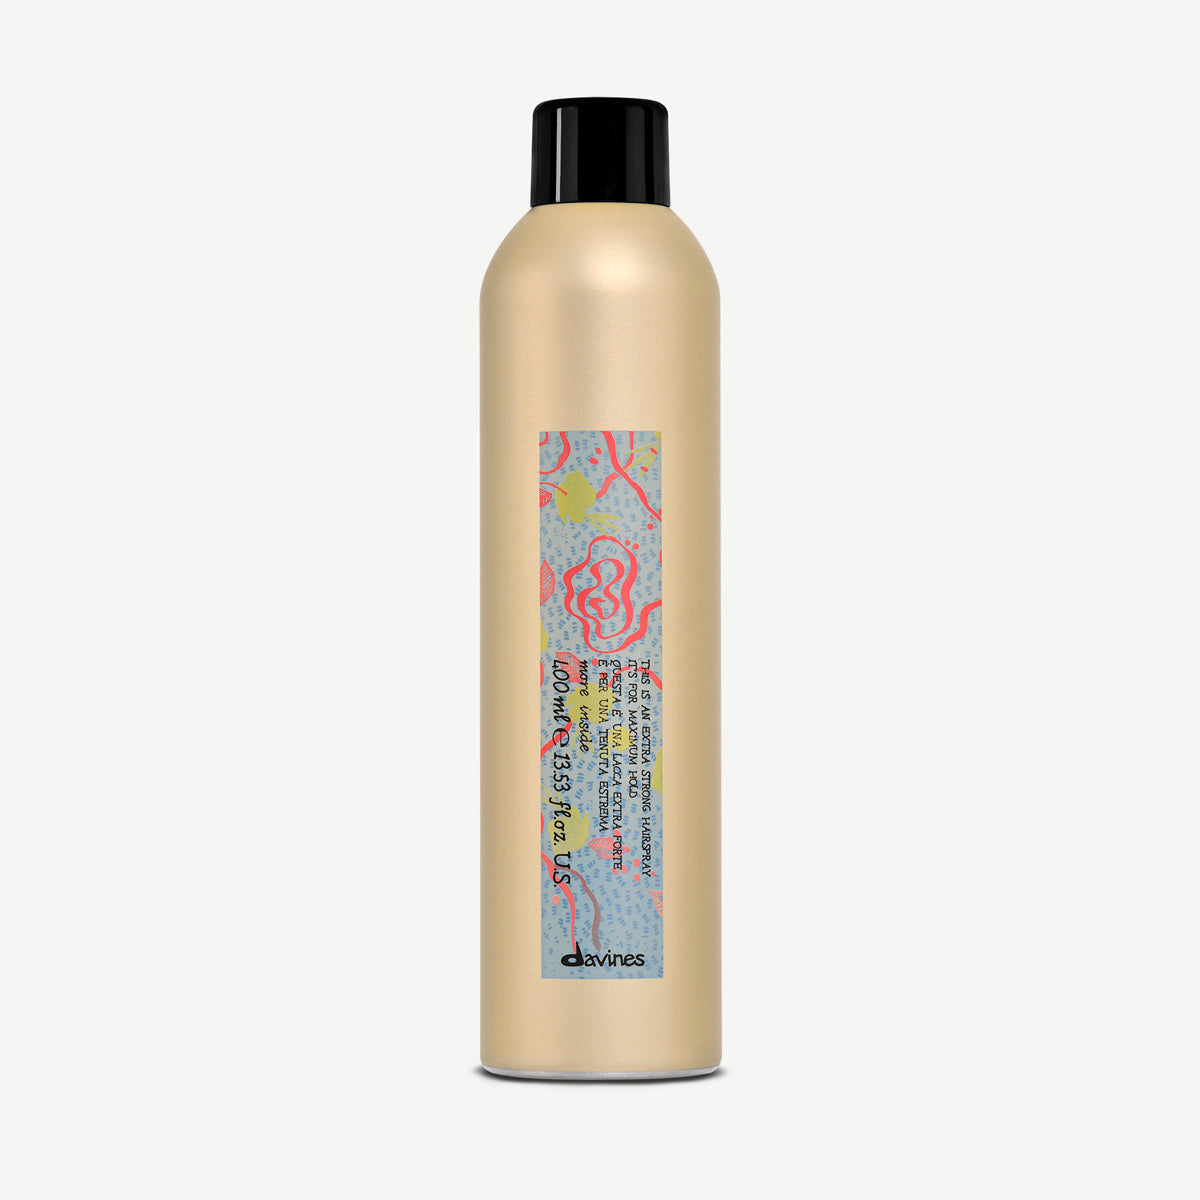 This is an Extra Strong Hair Spray